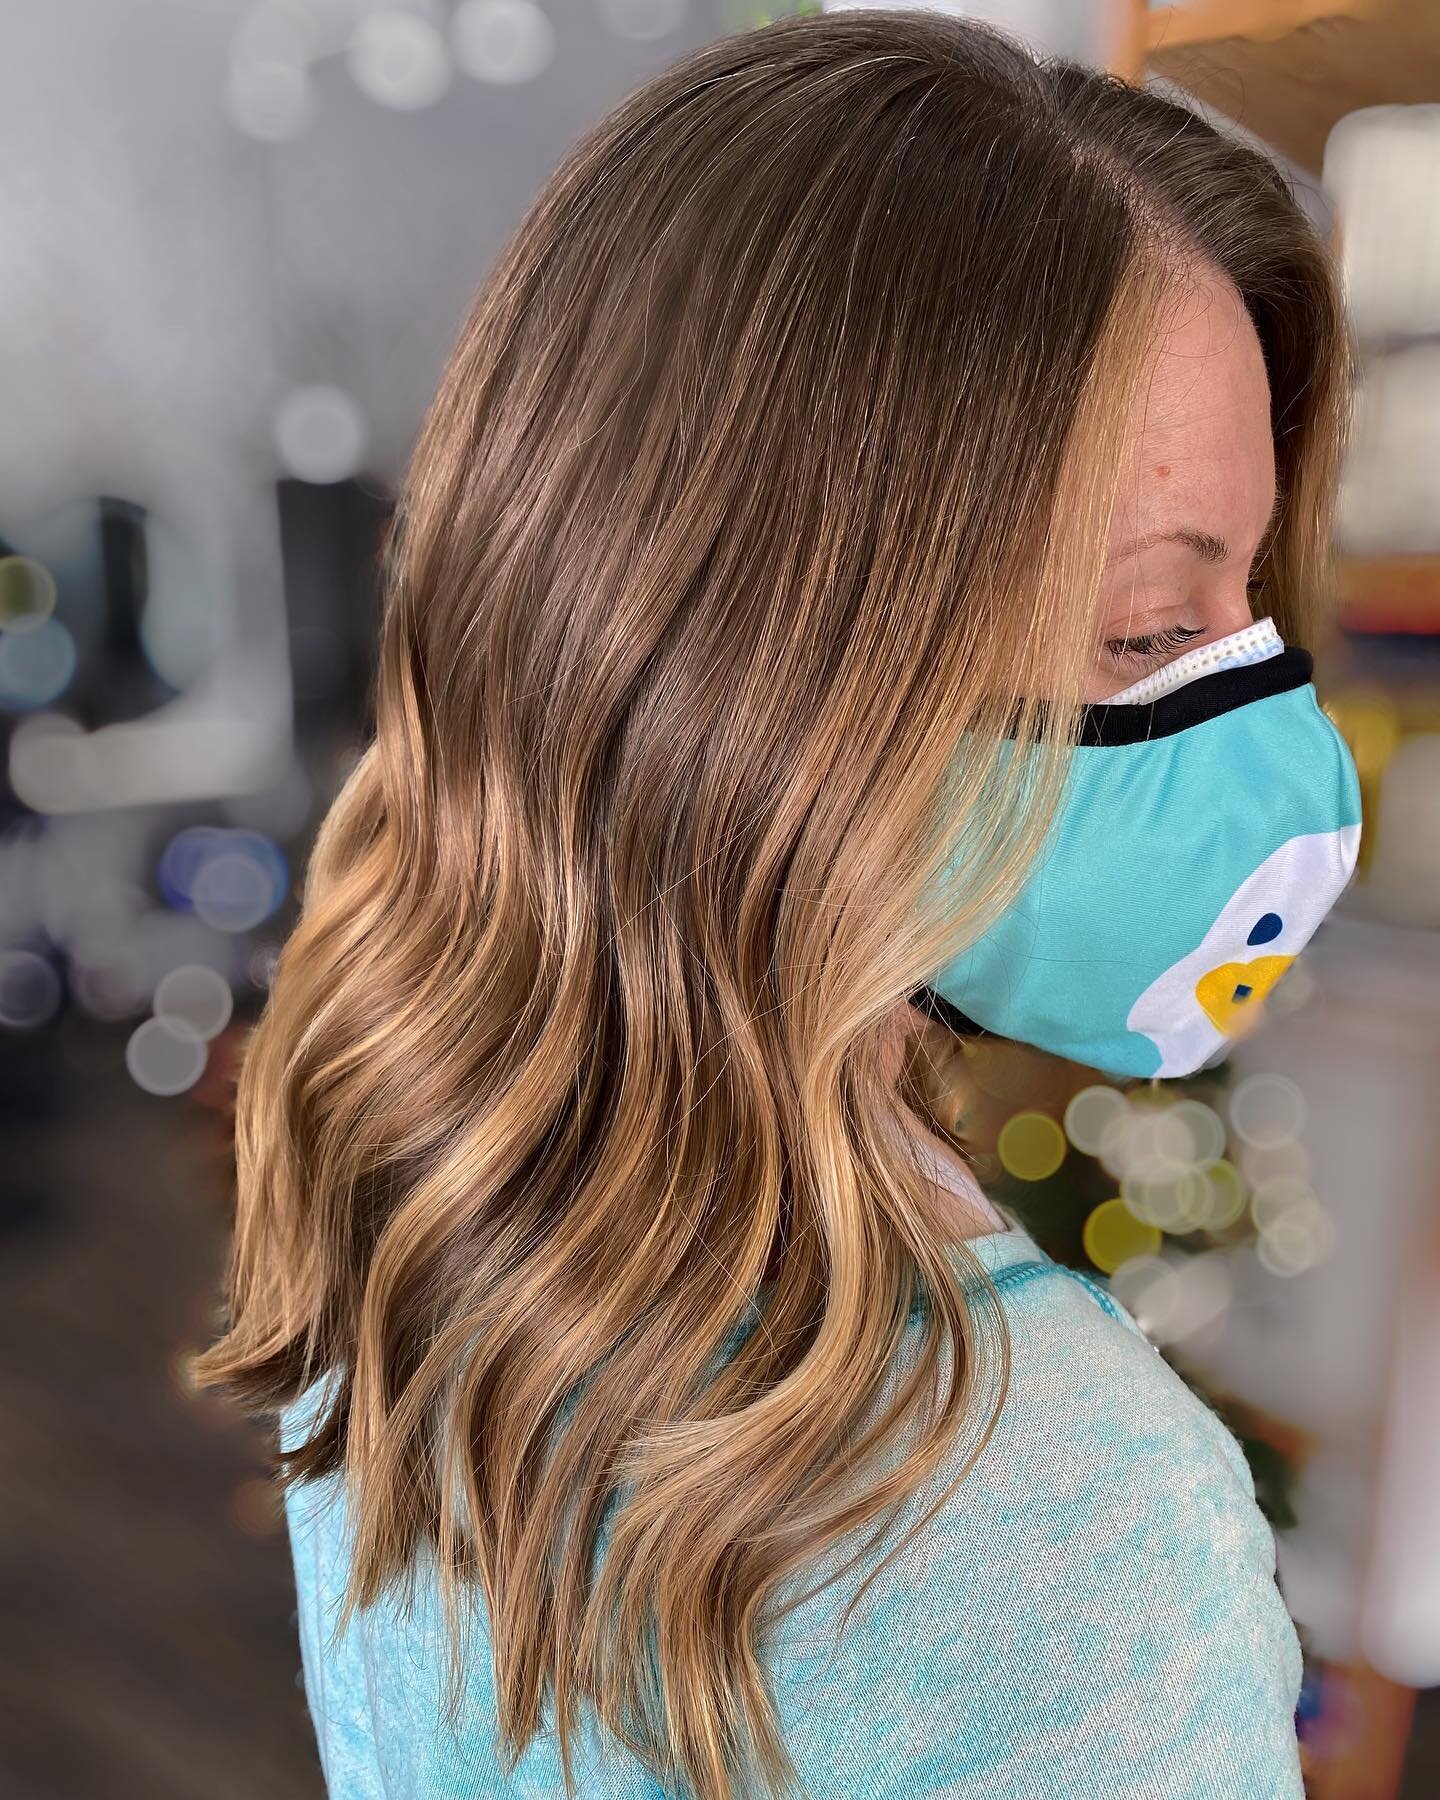 This sun kissed look is the perfect option for someone who wants a little brightness without a lot of maintenance. 
&bull;
&bull;
Open air balayage with @schwarzkopfusa blondeme
Toned with @redken SEQ
Styled with @oribe Royal Blowout and Supershine L